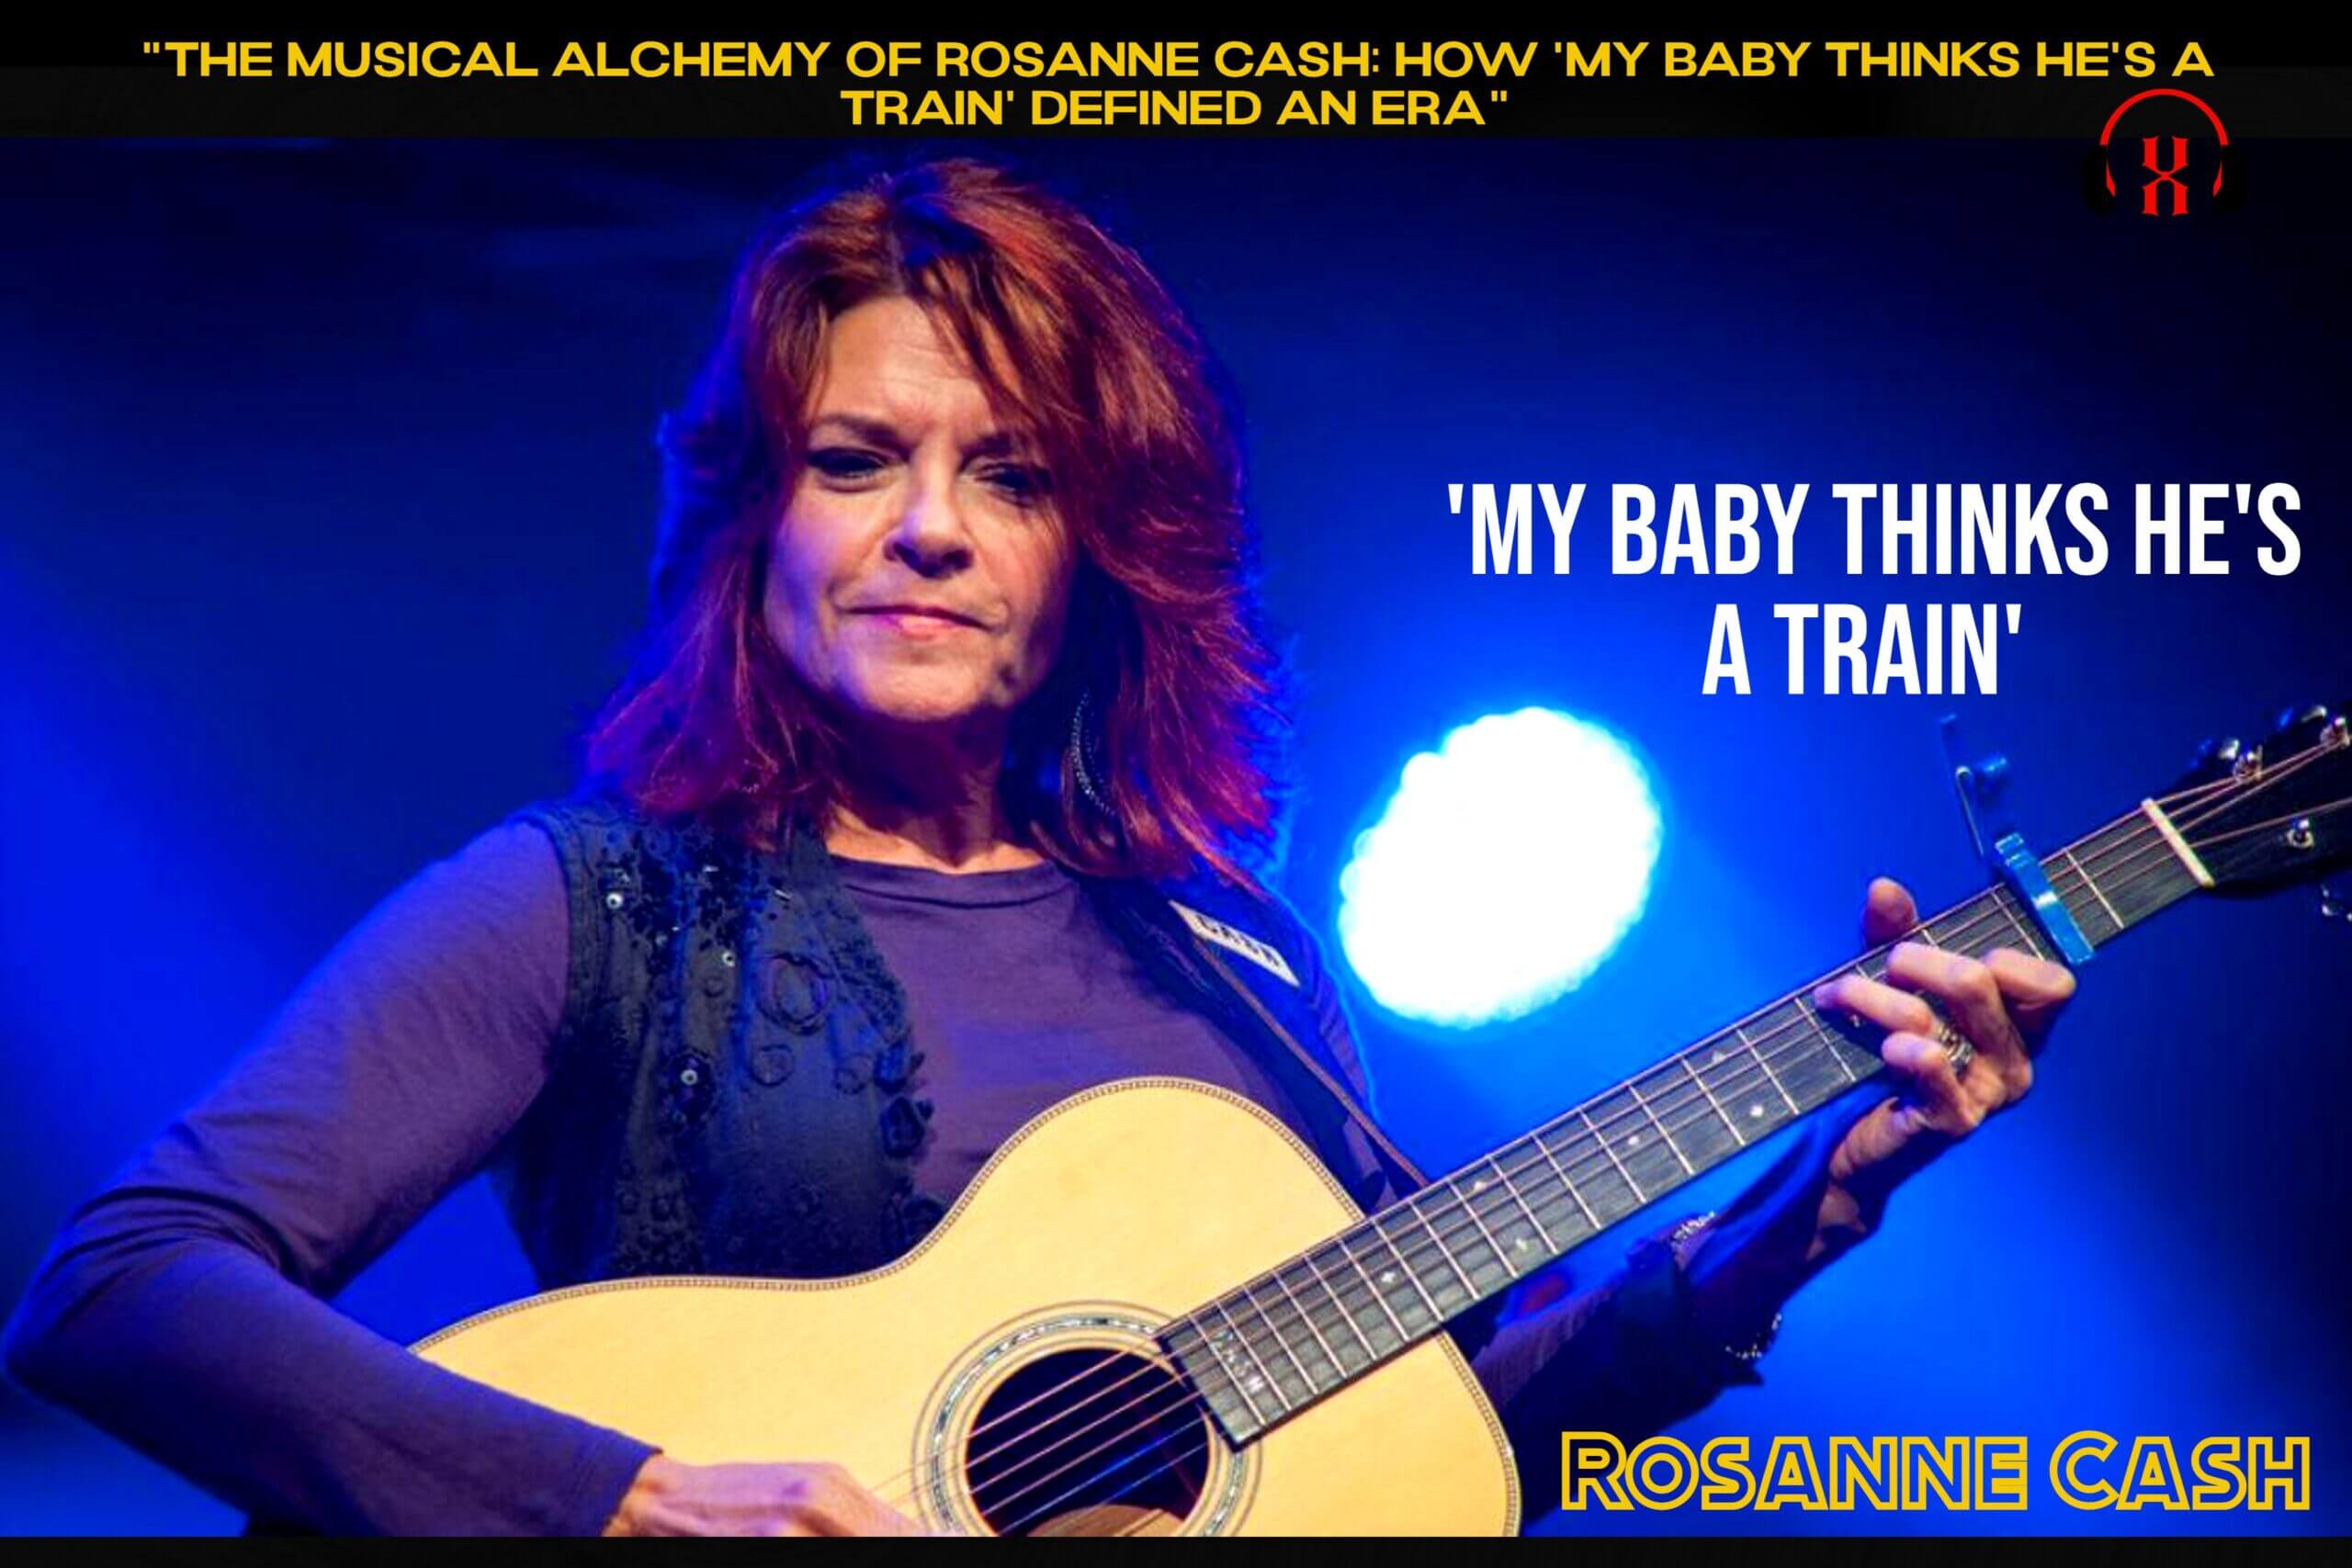 “The Musical Alchemy of Rosanne Cash: How ‘My Baby Thinks He’s A Train’ Defined an Era”